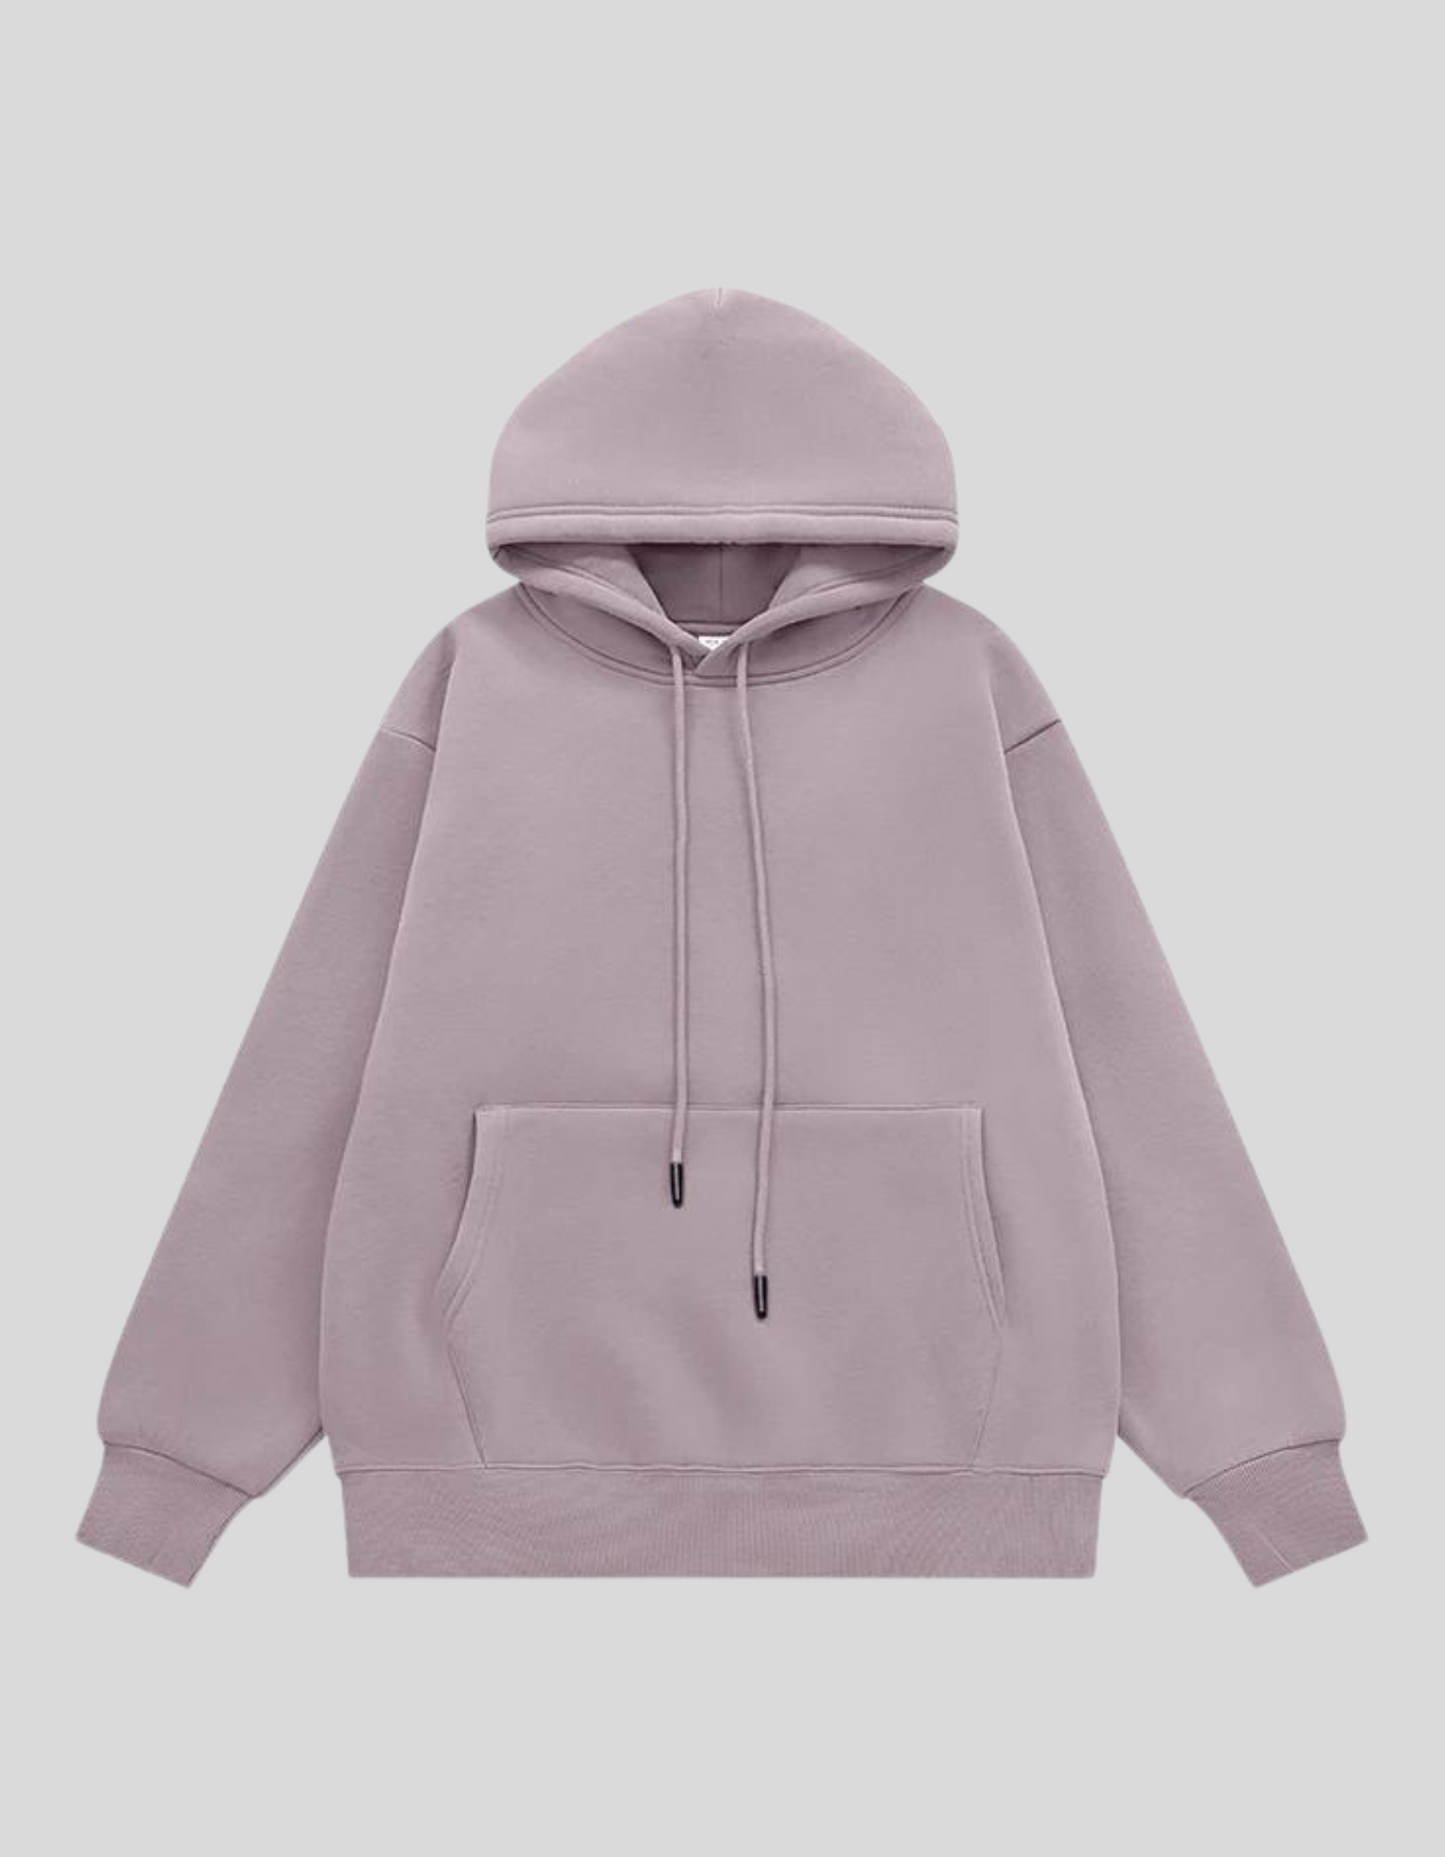 INFLATION 350gsm Thick Velvet Unisex Hoodies | Green, Purple, Oatmeal